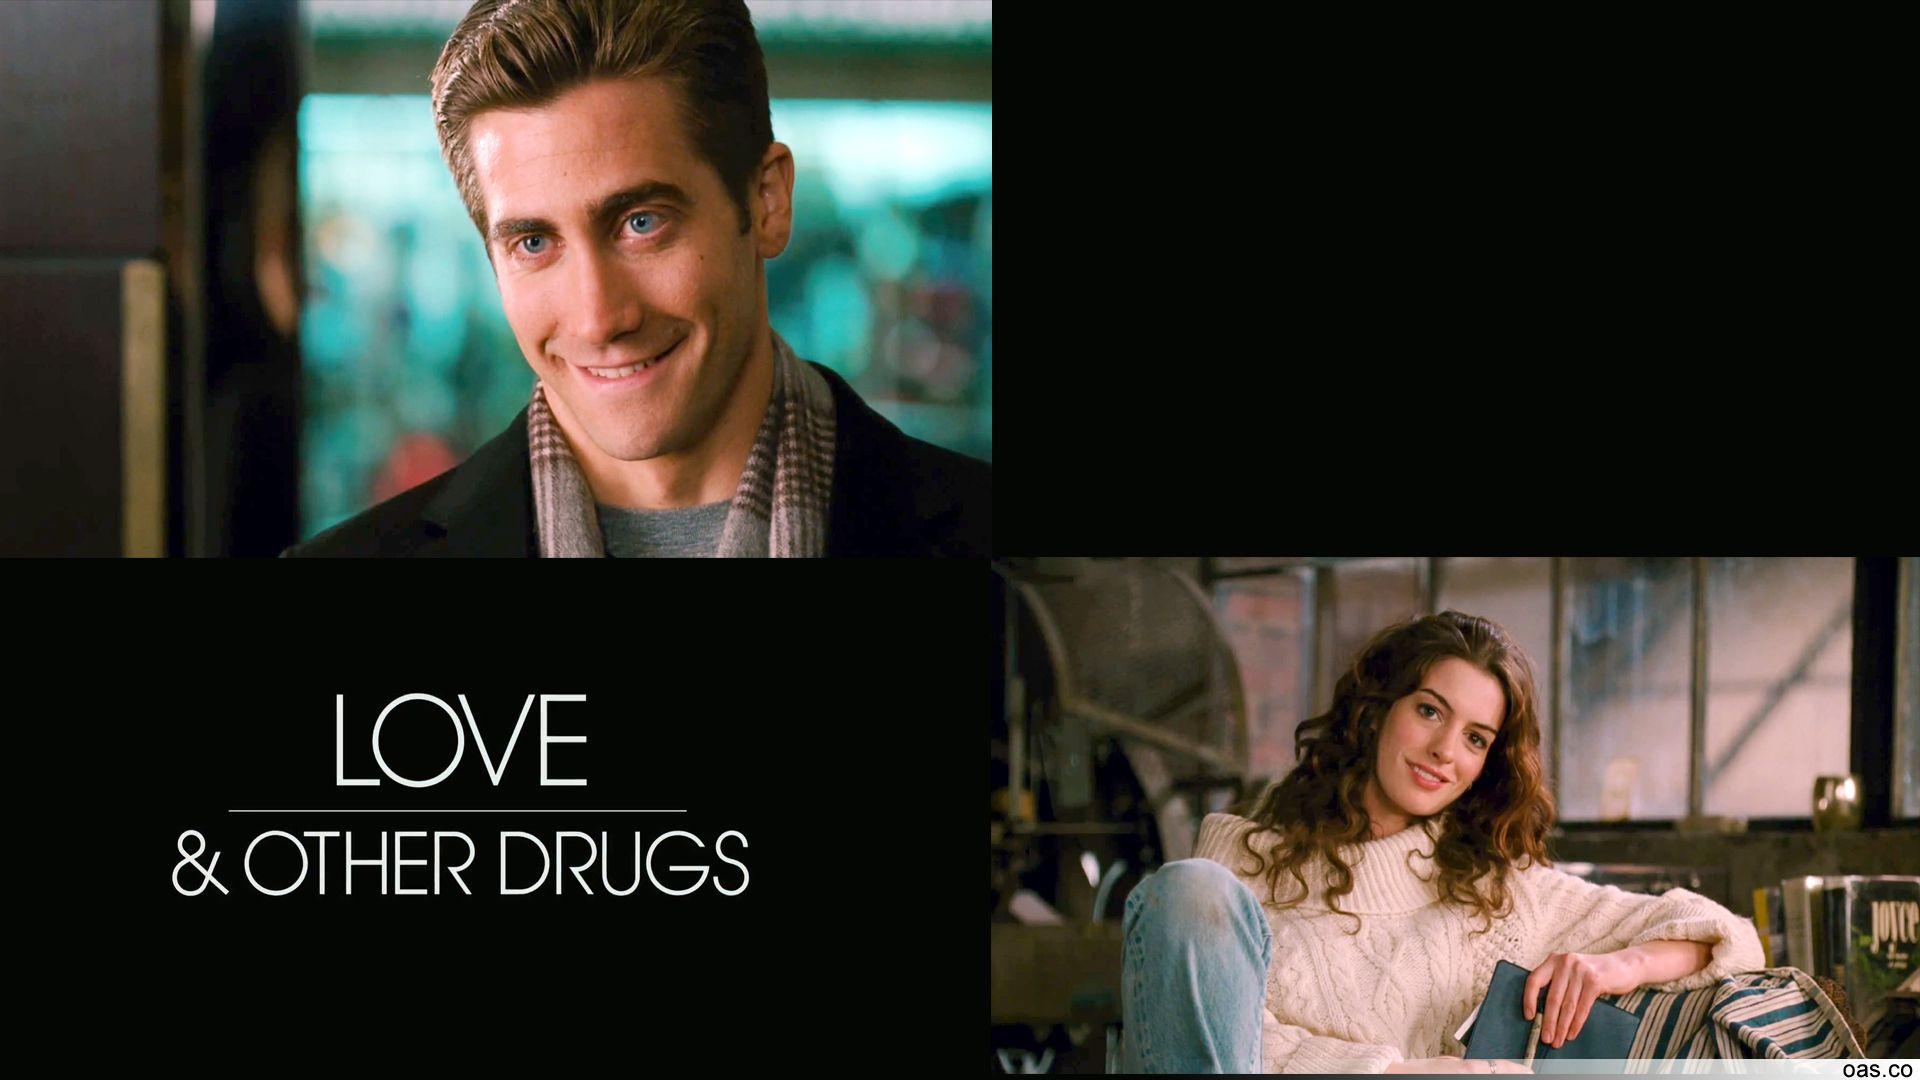 Love & Other Drugs Movie